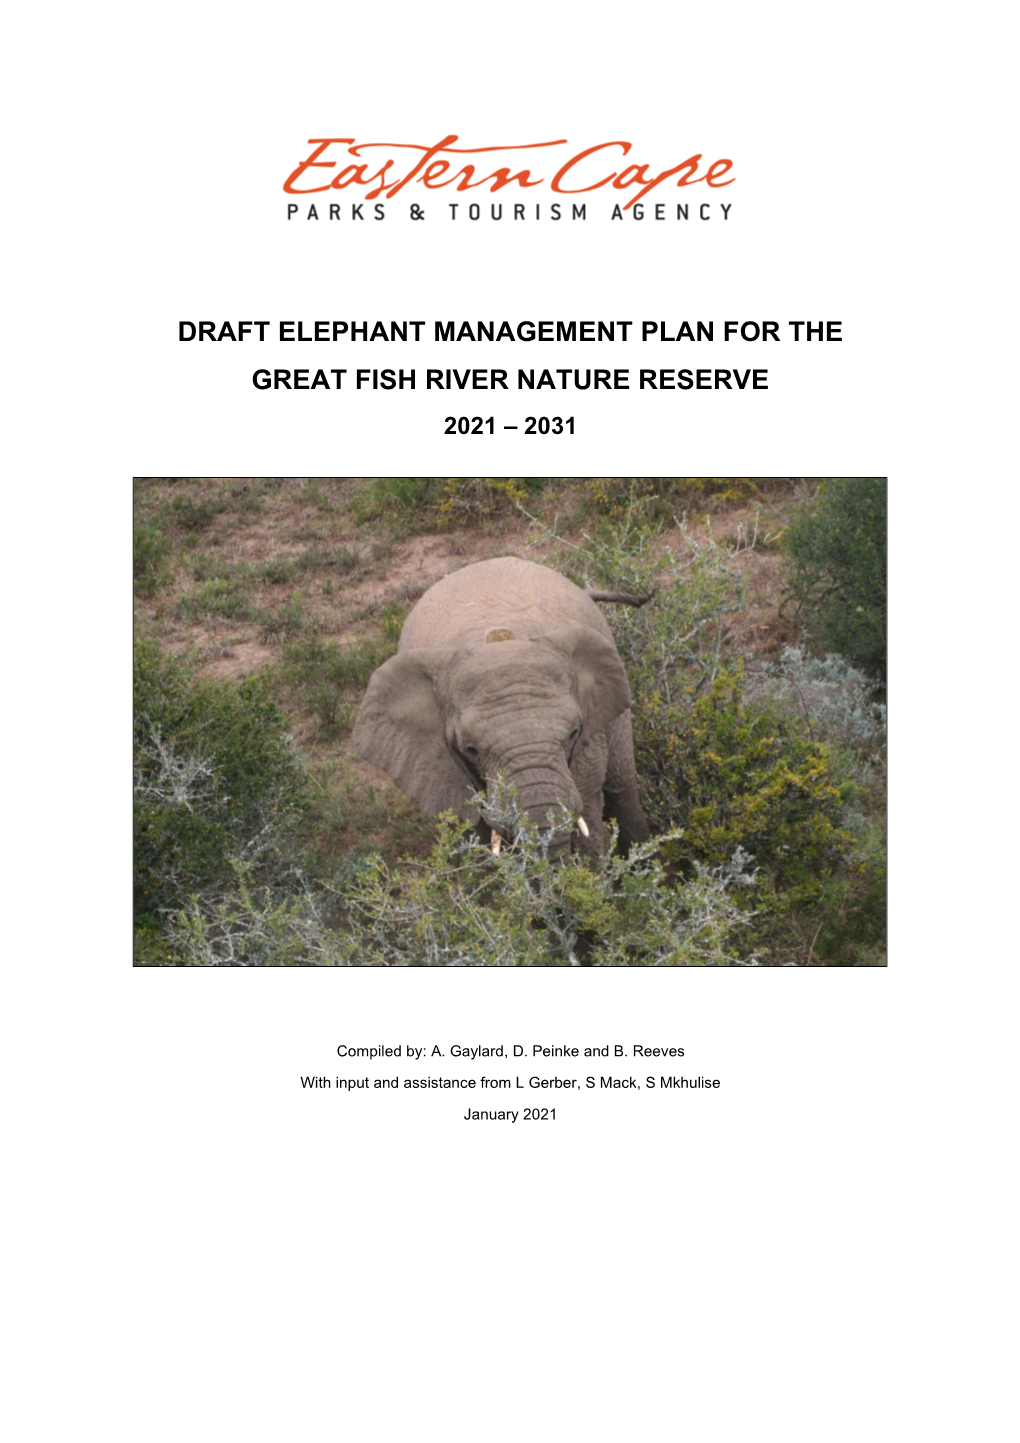 Great Fish Nature Reserve | Elephant Management Plan| January 2021 Page 1 of 119